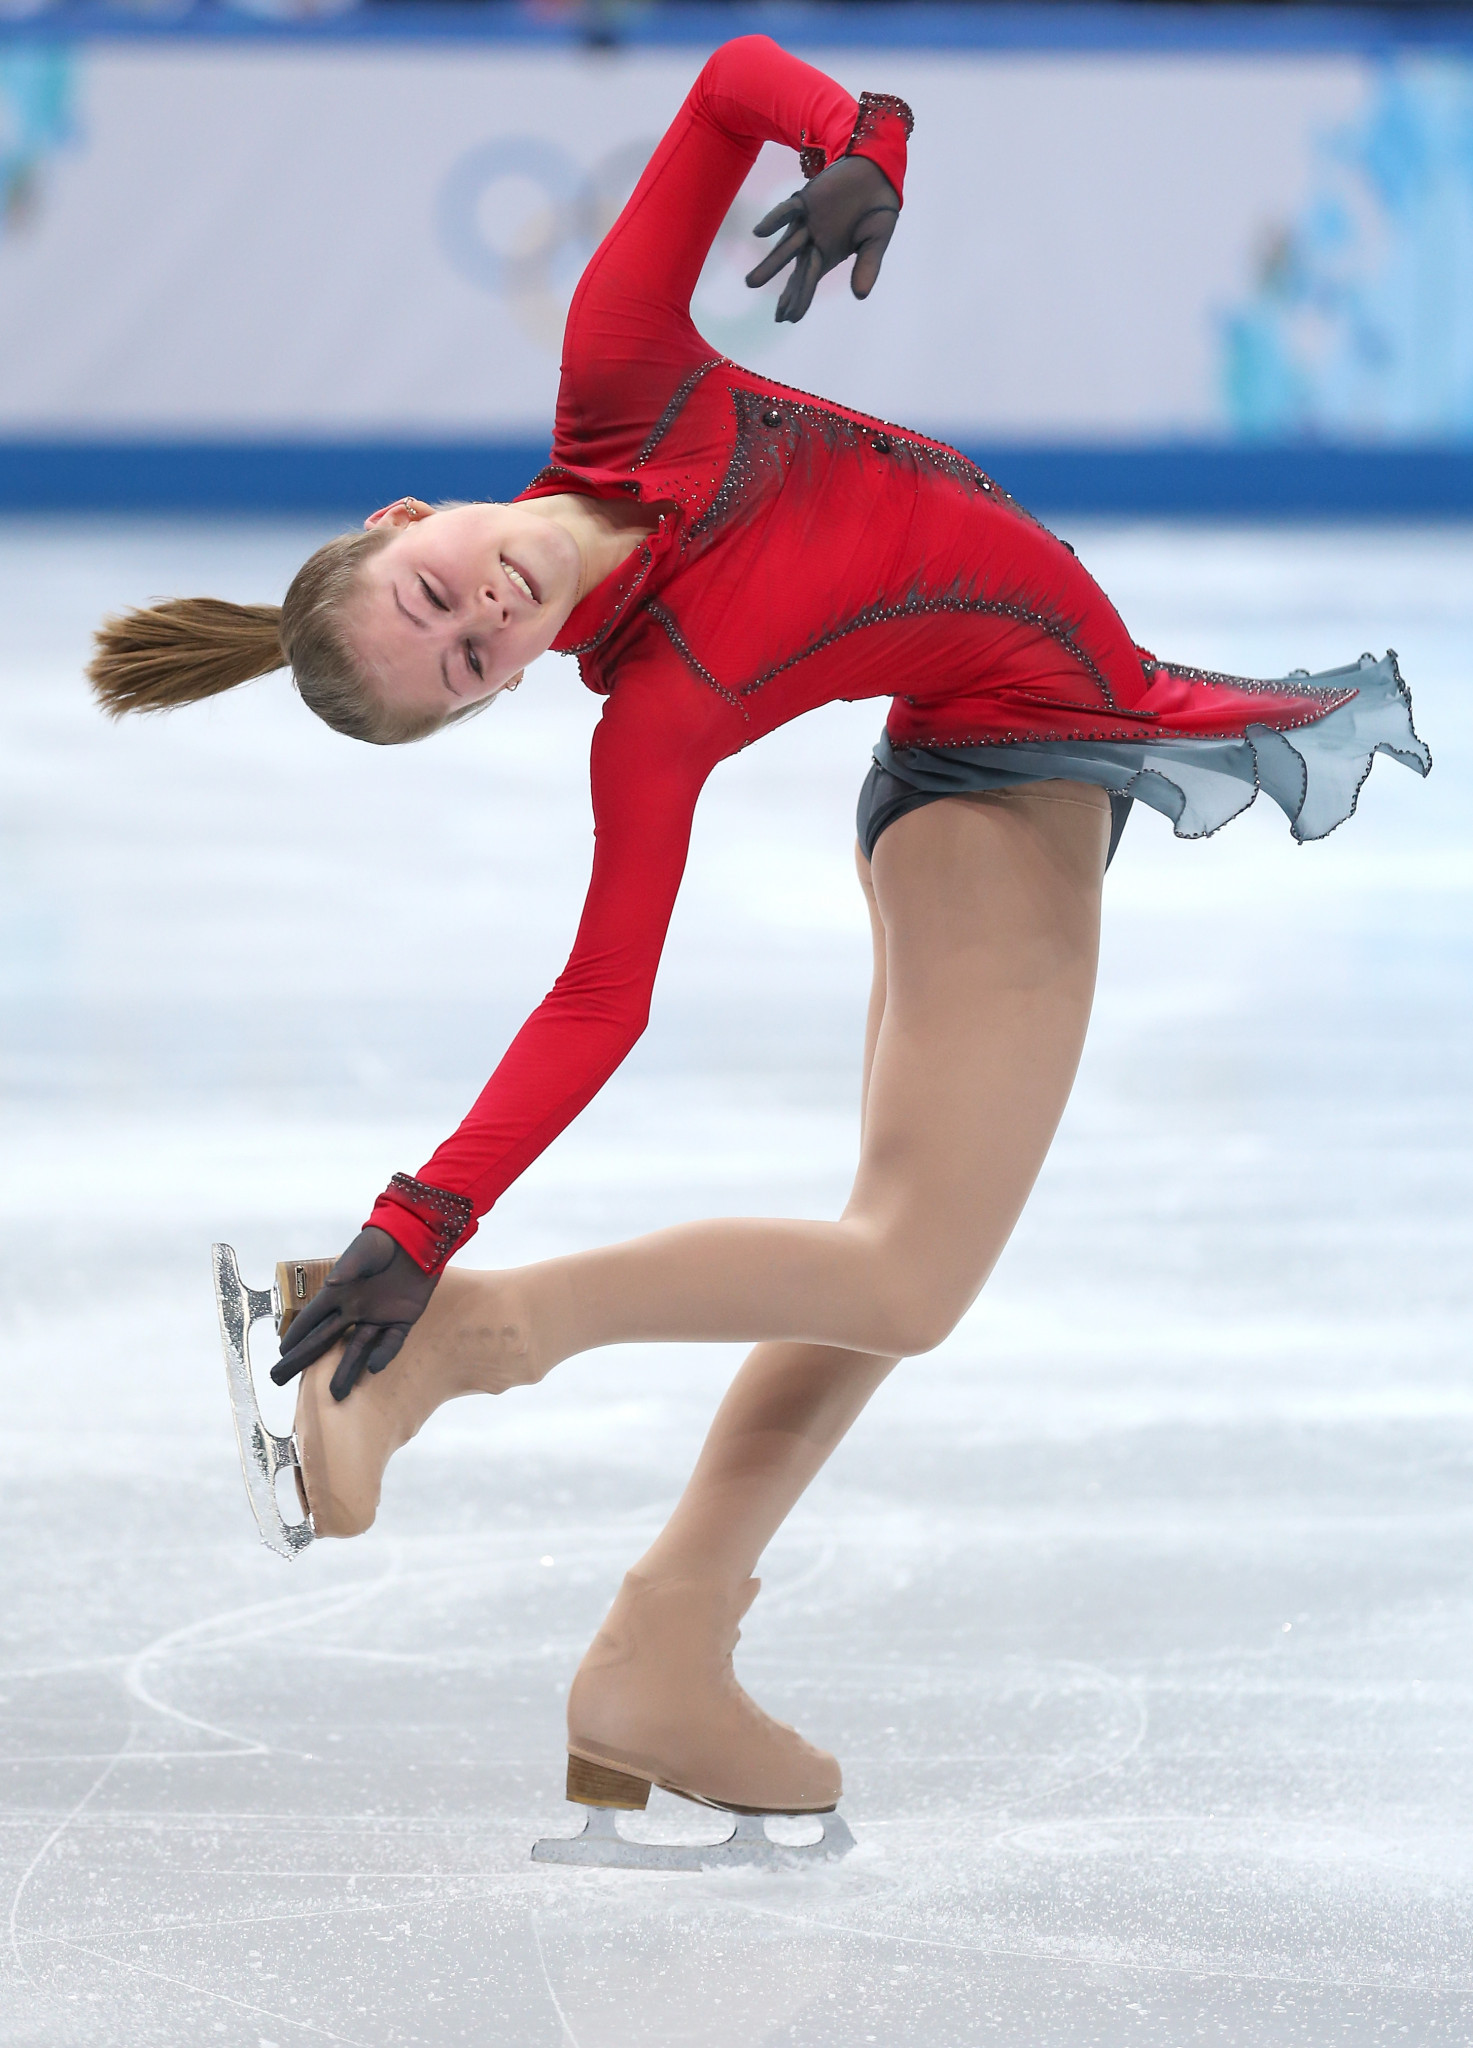 Yulia Lipnitskaya became the youngest Olympic figure skating gold medallist in modern times when she helped Russia to the team title at Sochi 2014 ©Getty Images